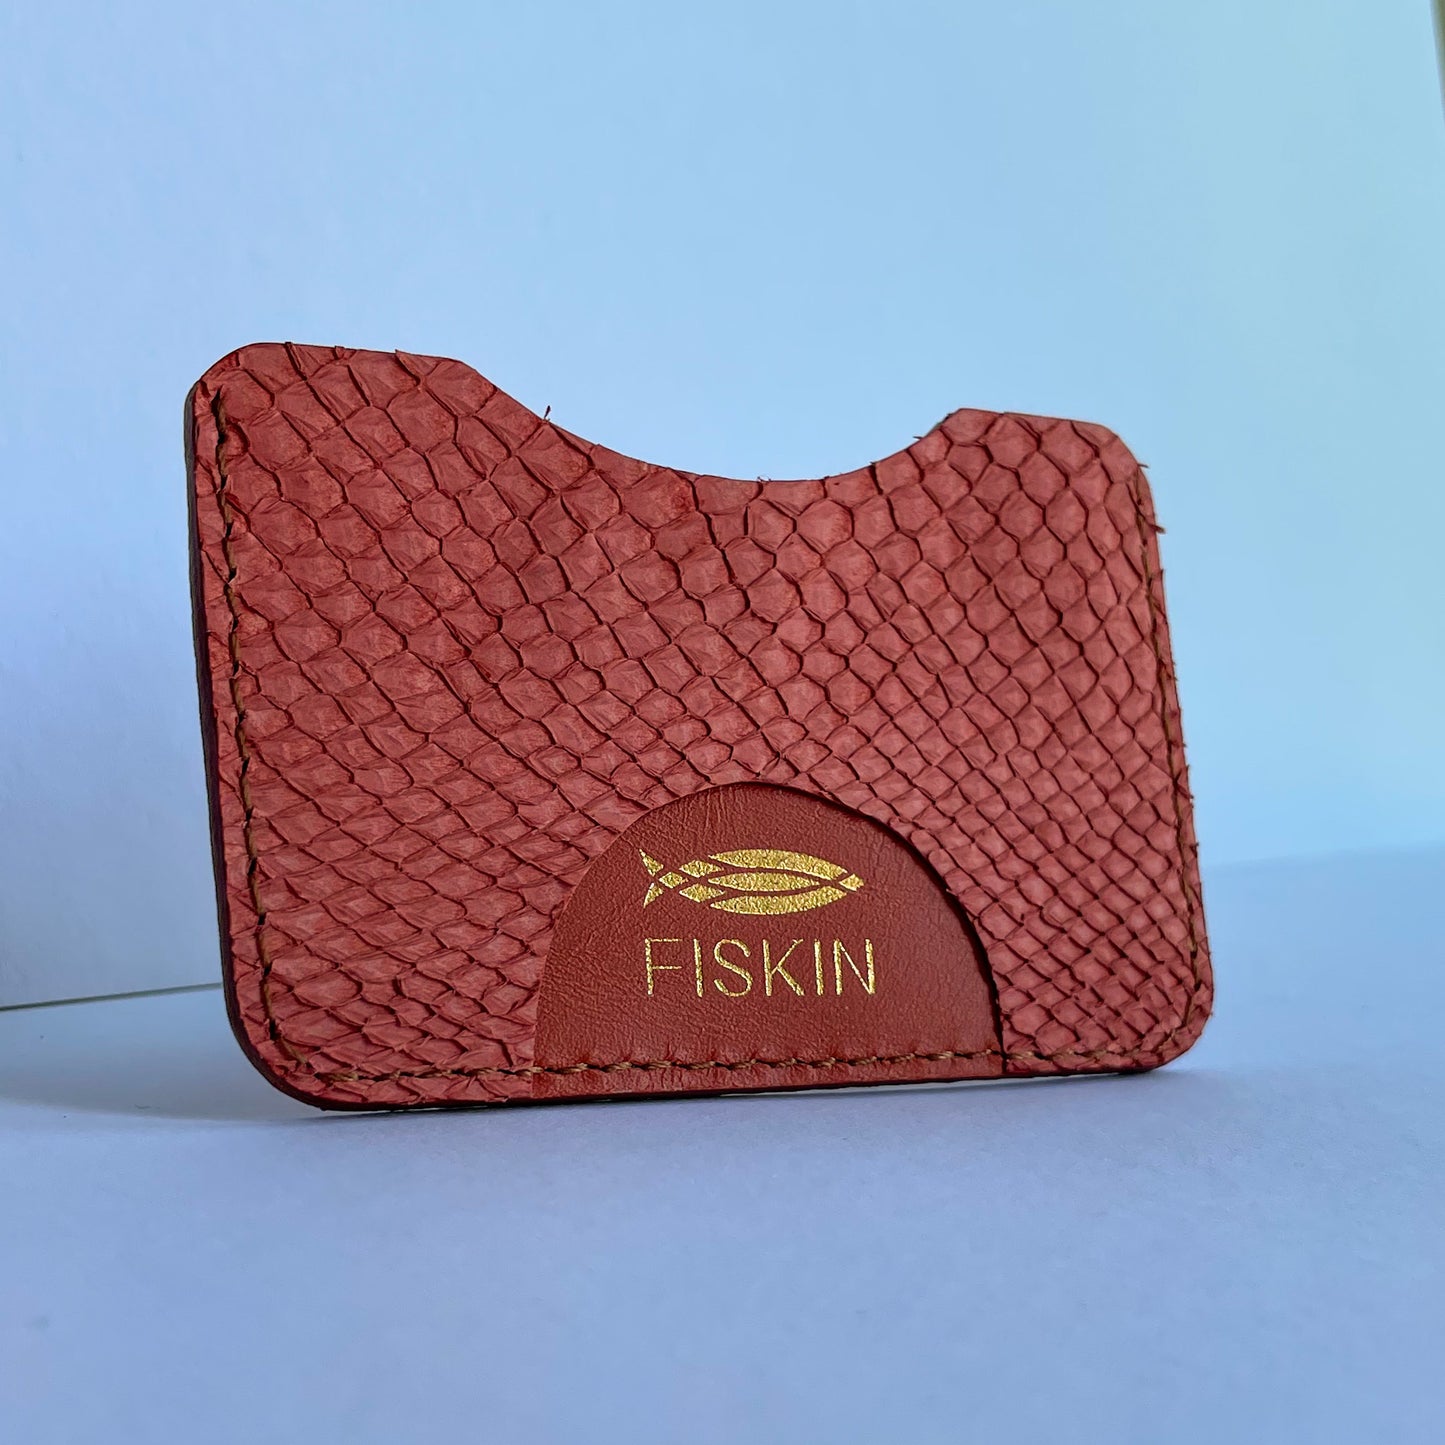 Fish leather cardholder, sun touch collection